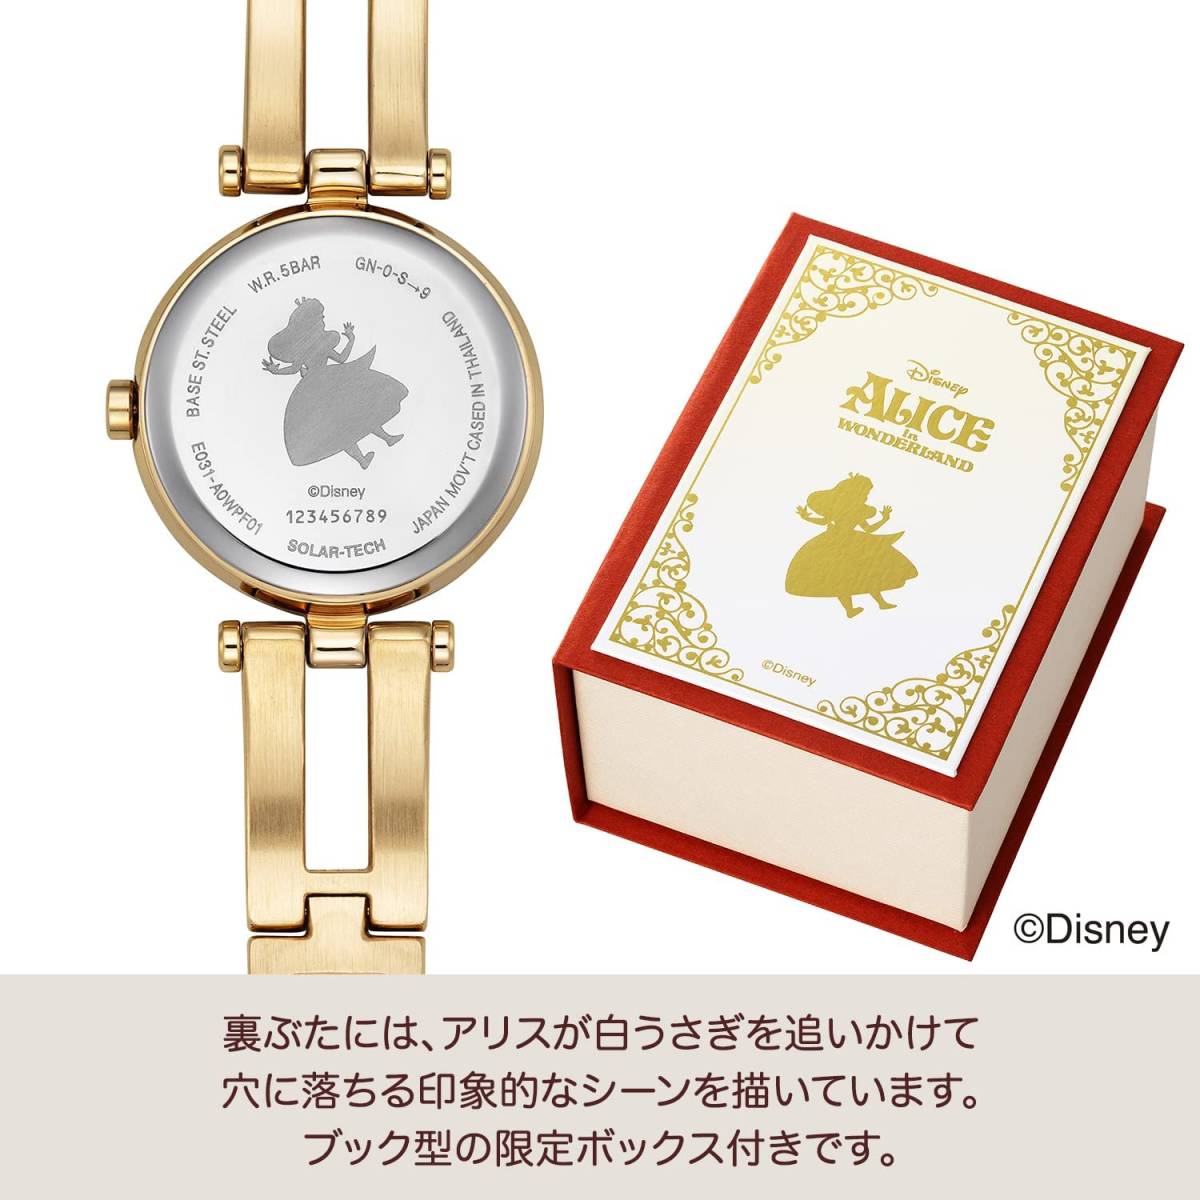  sale! new goods Citizen Wicca wicca limited goods KP5-221-11 Disney collection Disney .... country. Alice solar lady's wristwatch 